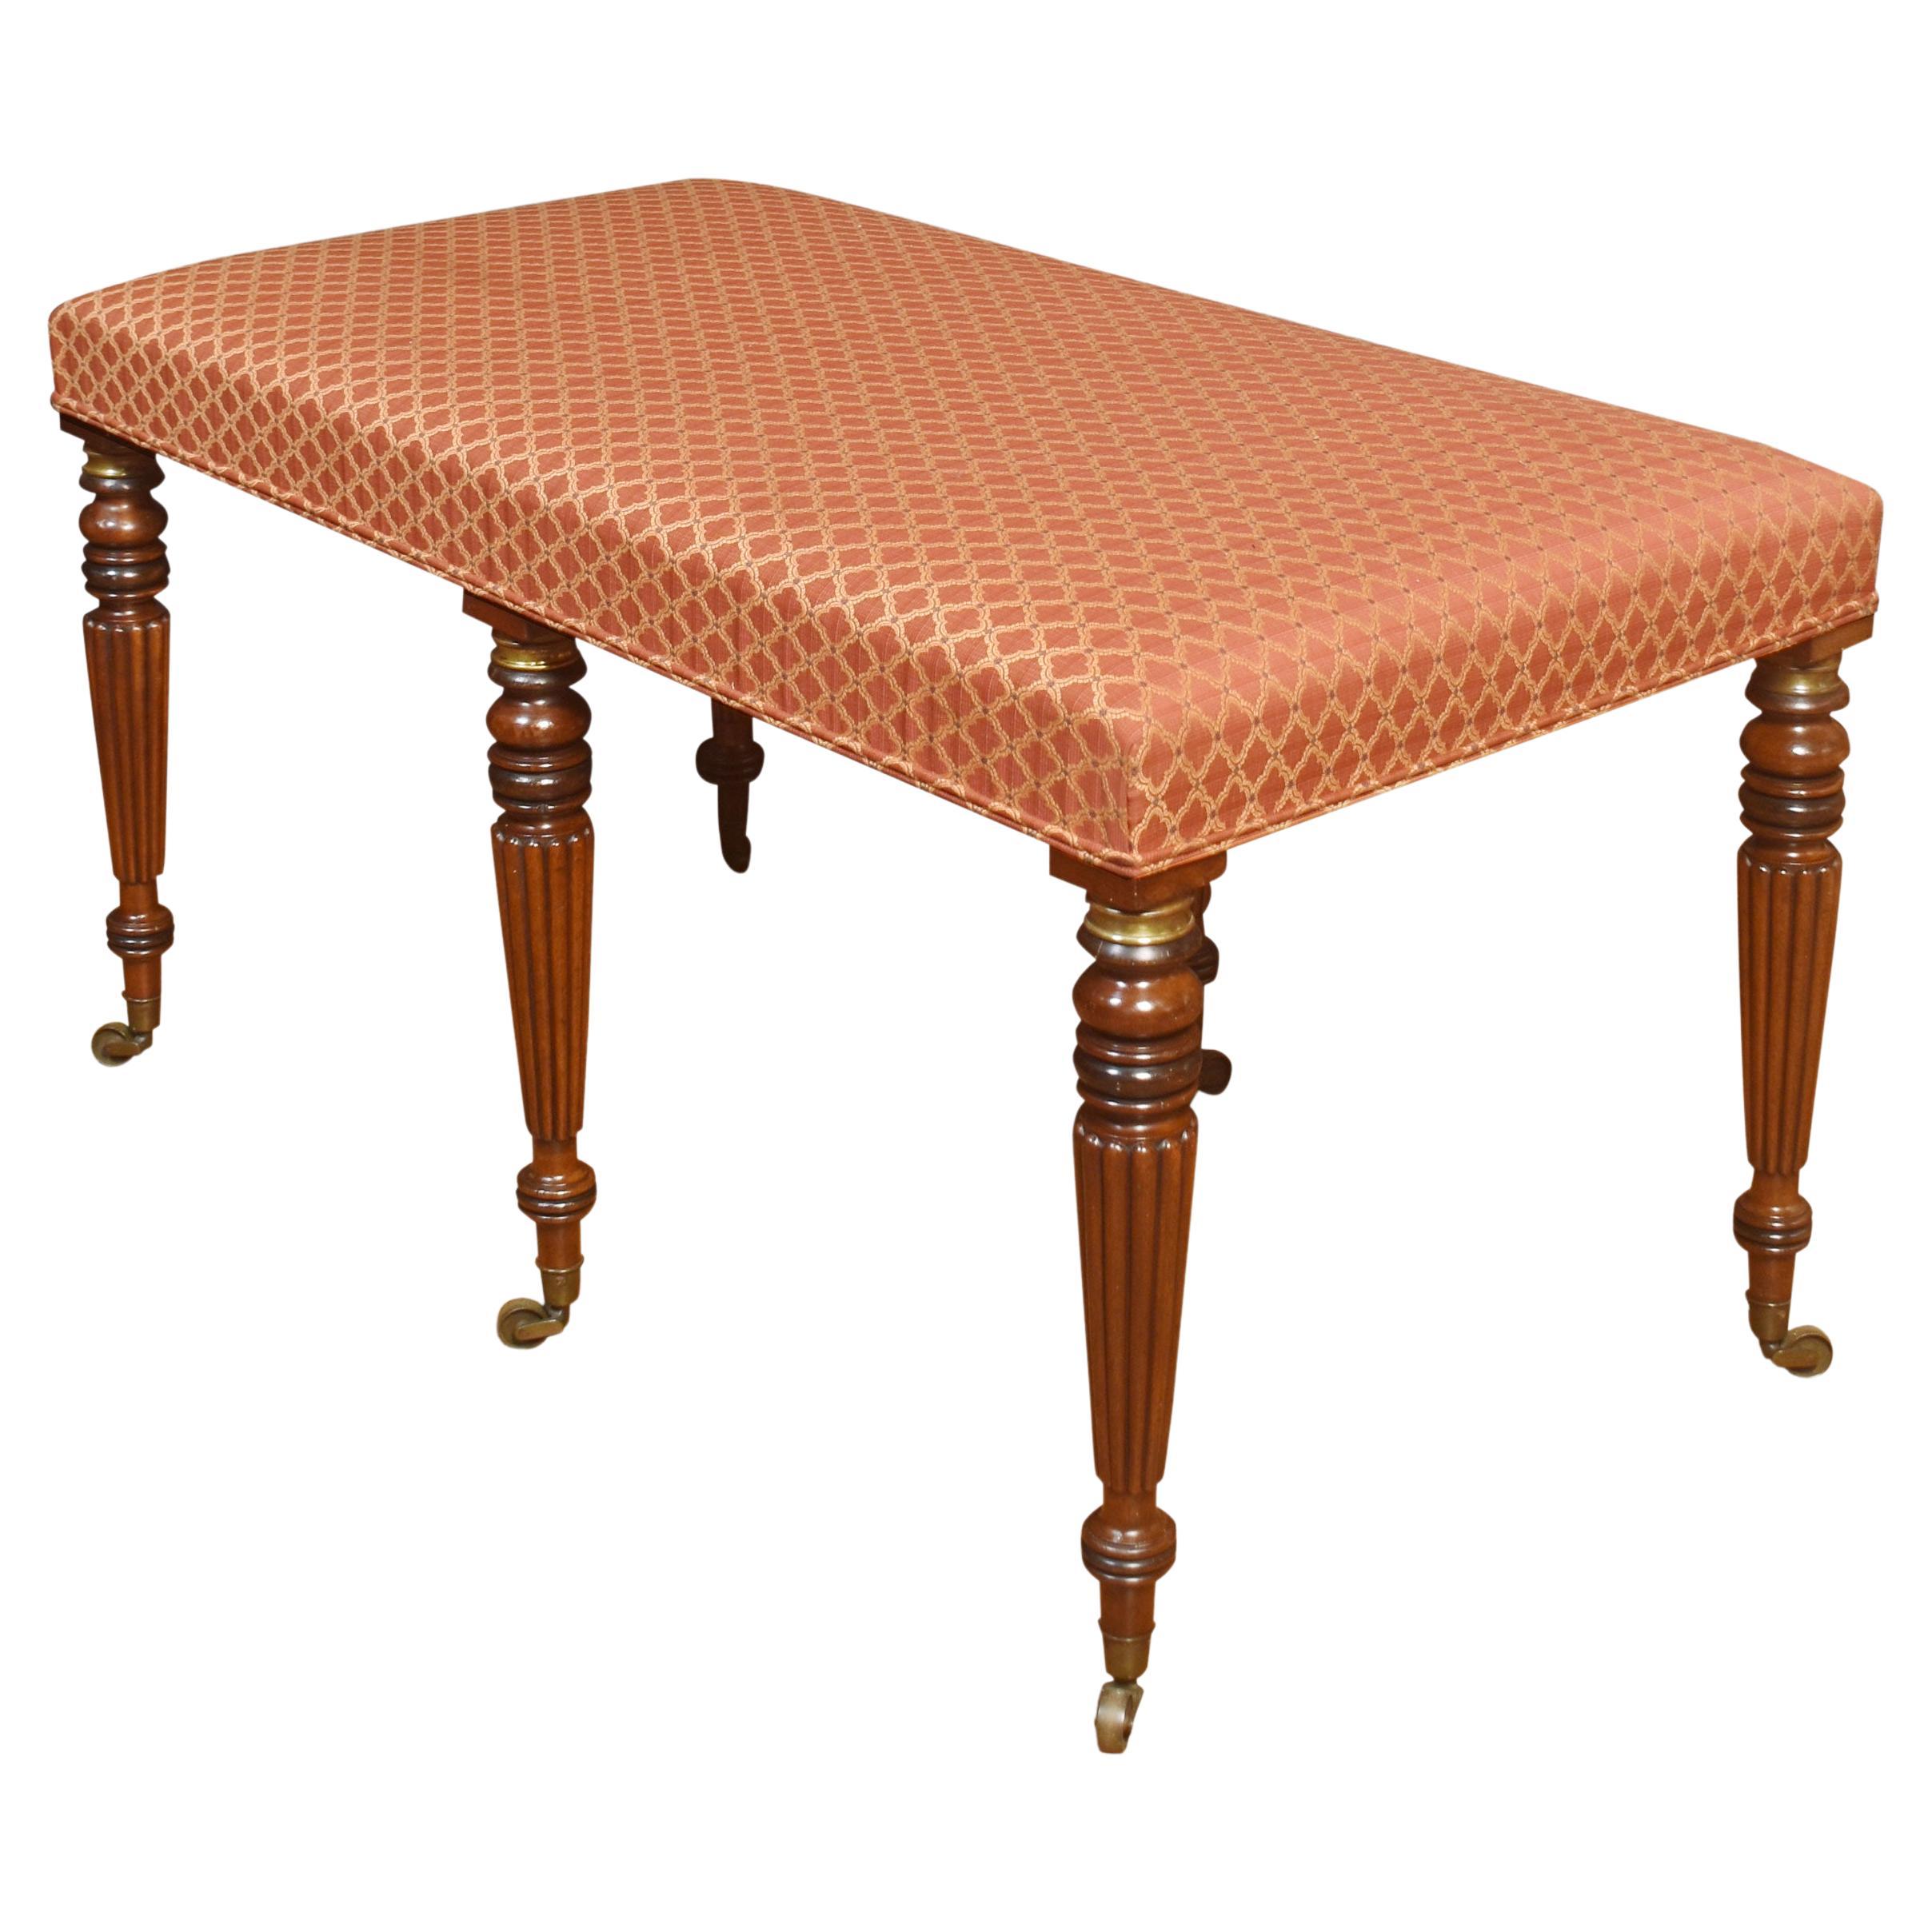 Large Country House Stool